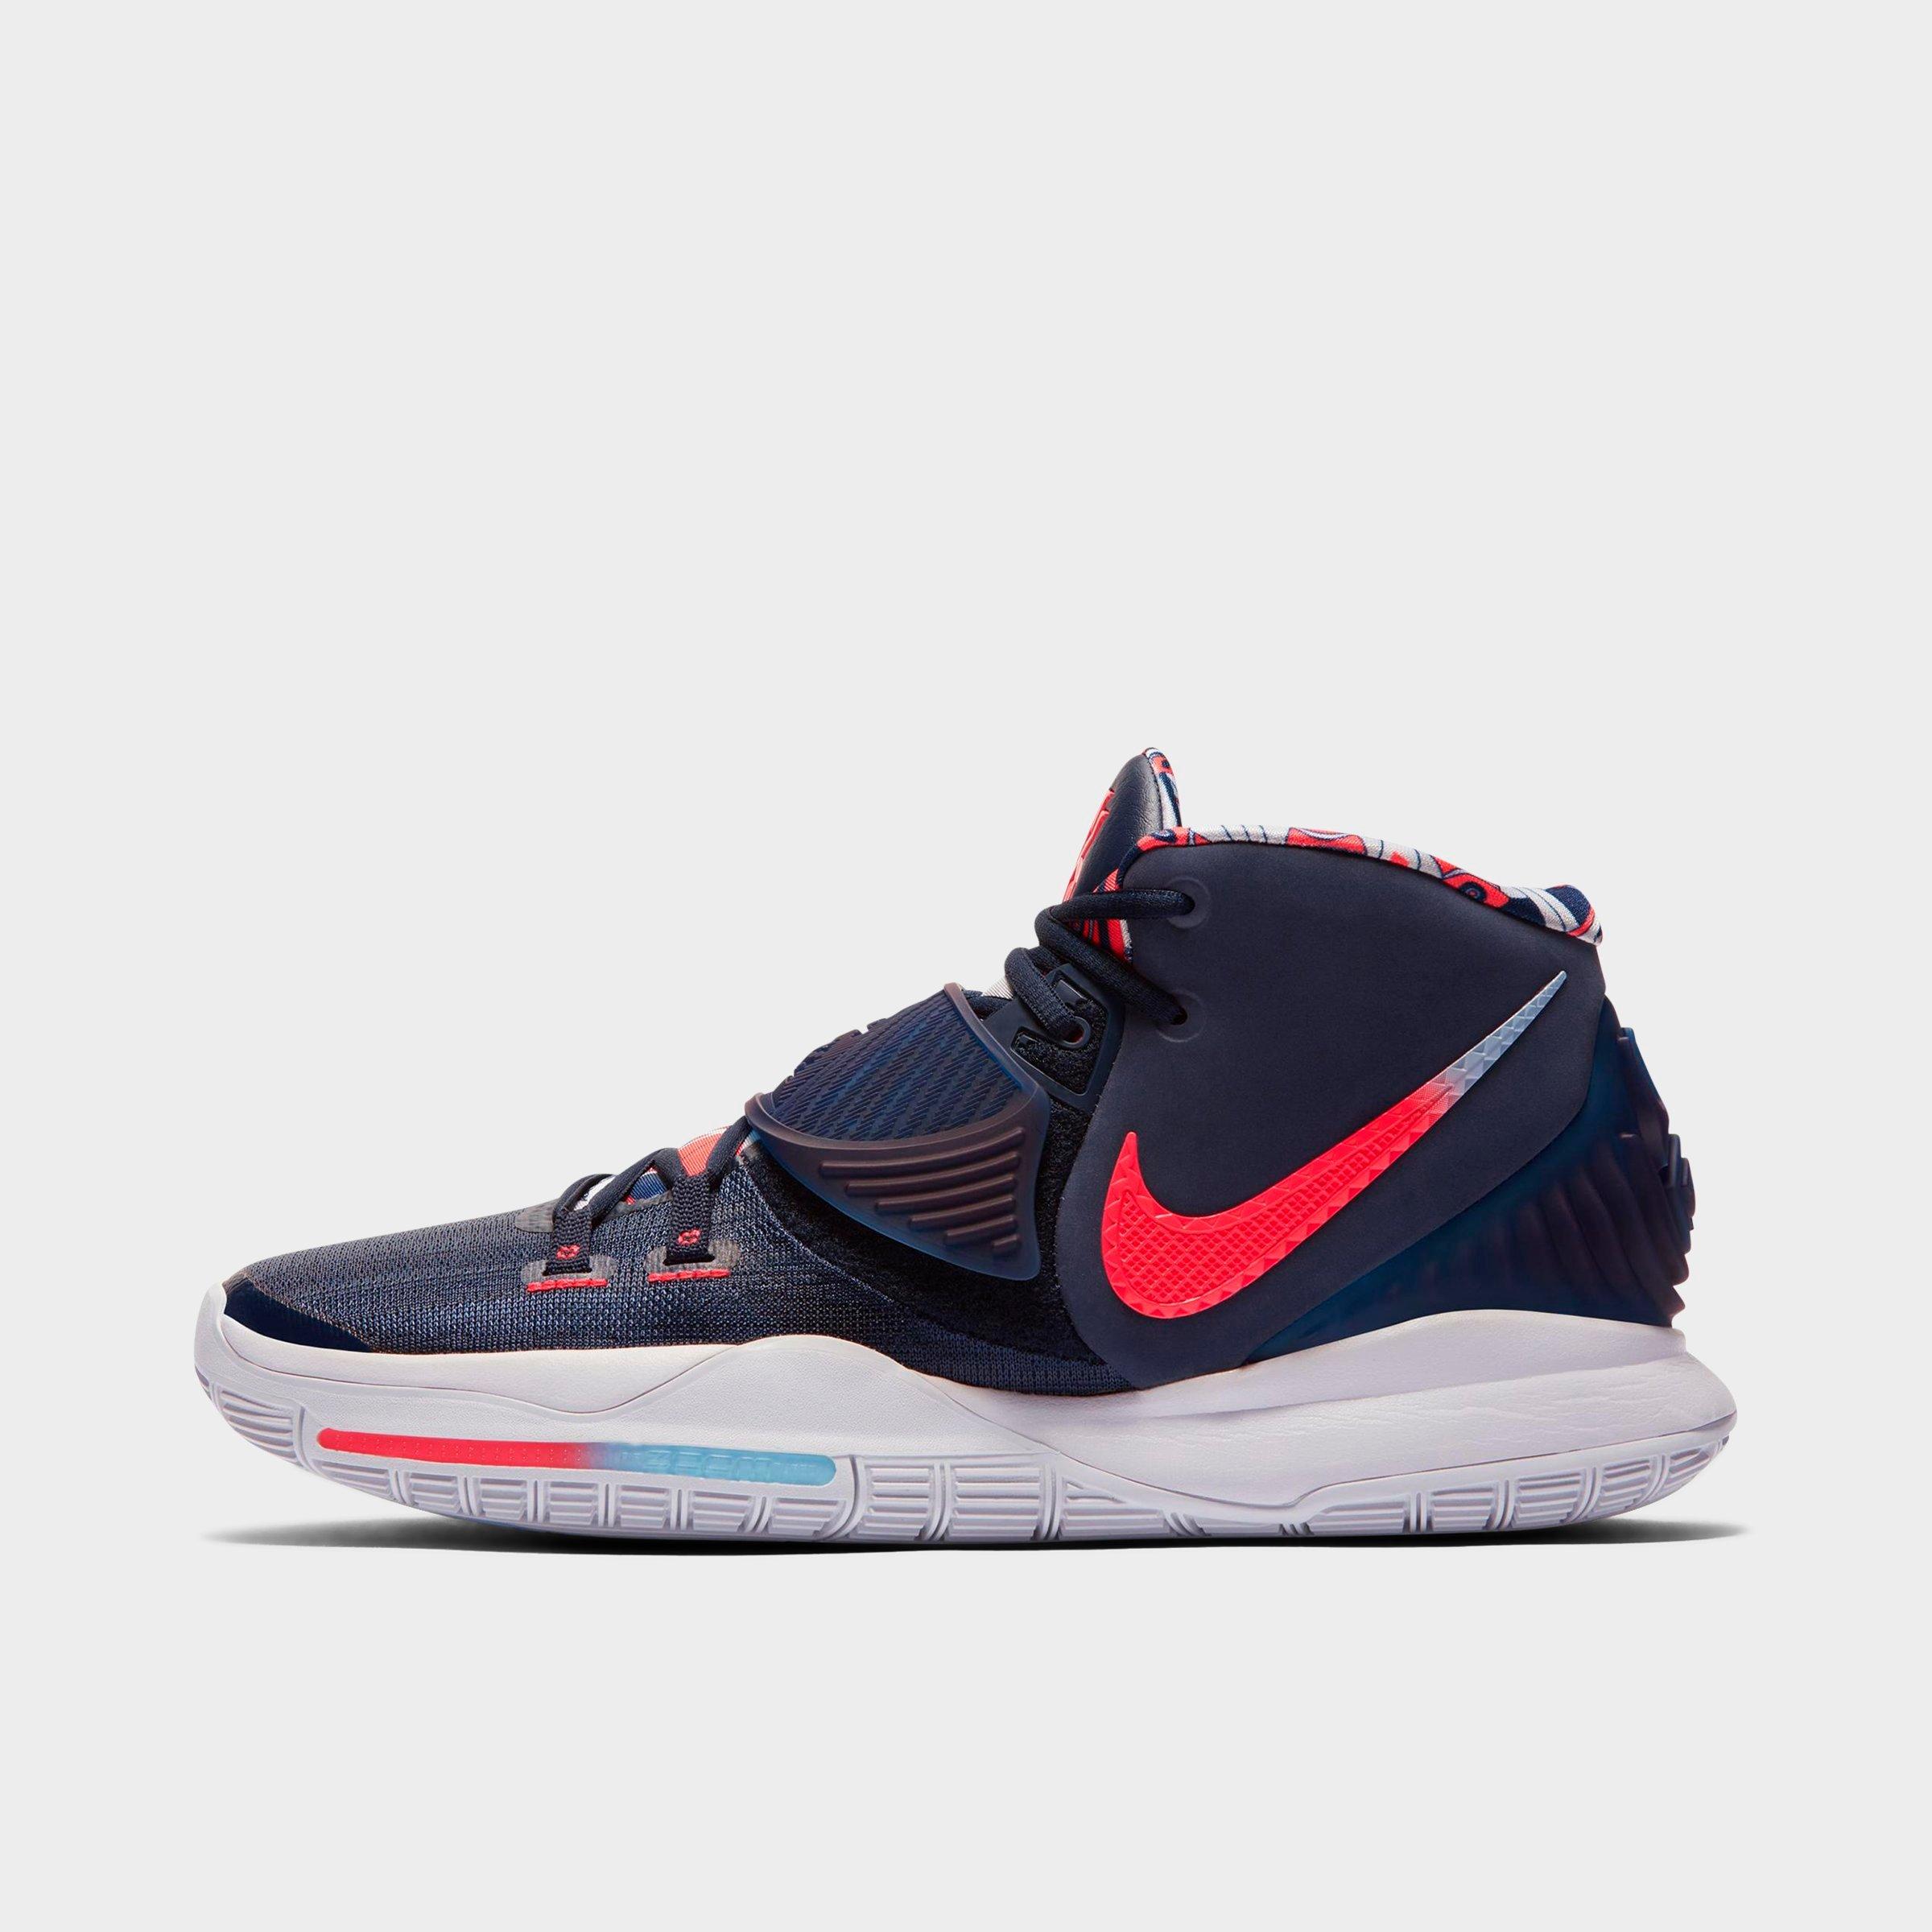 kyrie irving shoes for sale